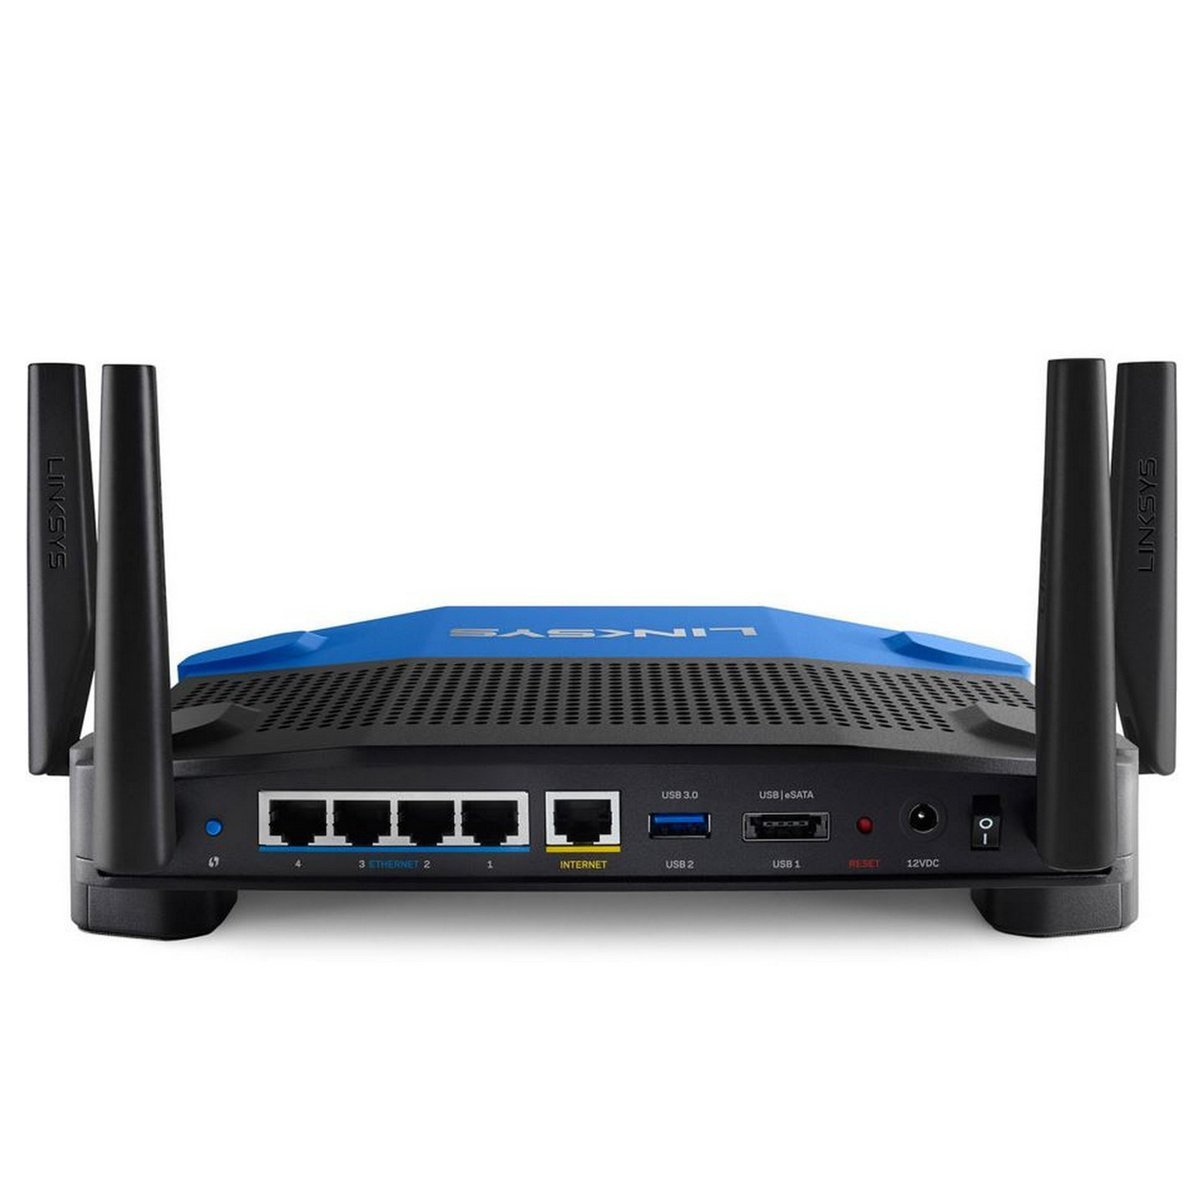 Linksys WRT1900AC Wireless AC Dual Band Smart Router - Store 974 | ستور ٩٧٤